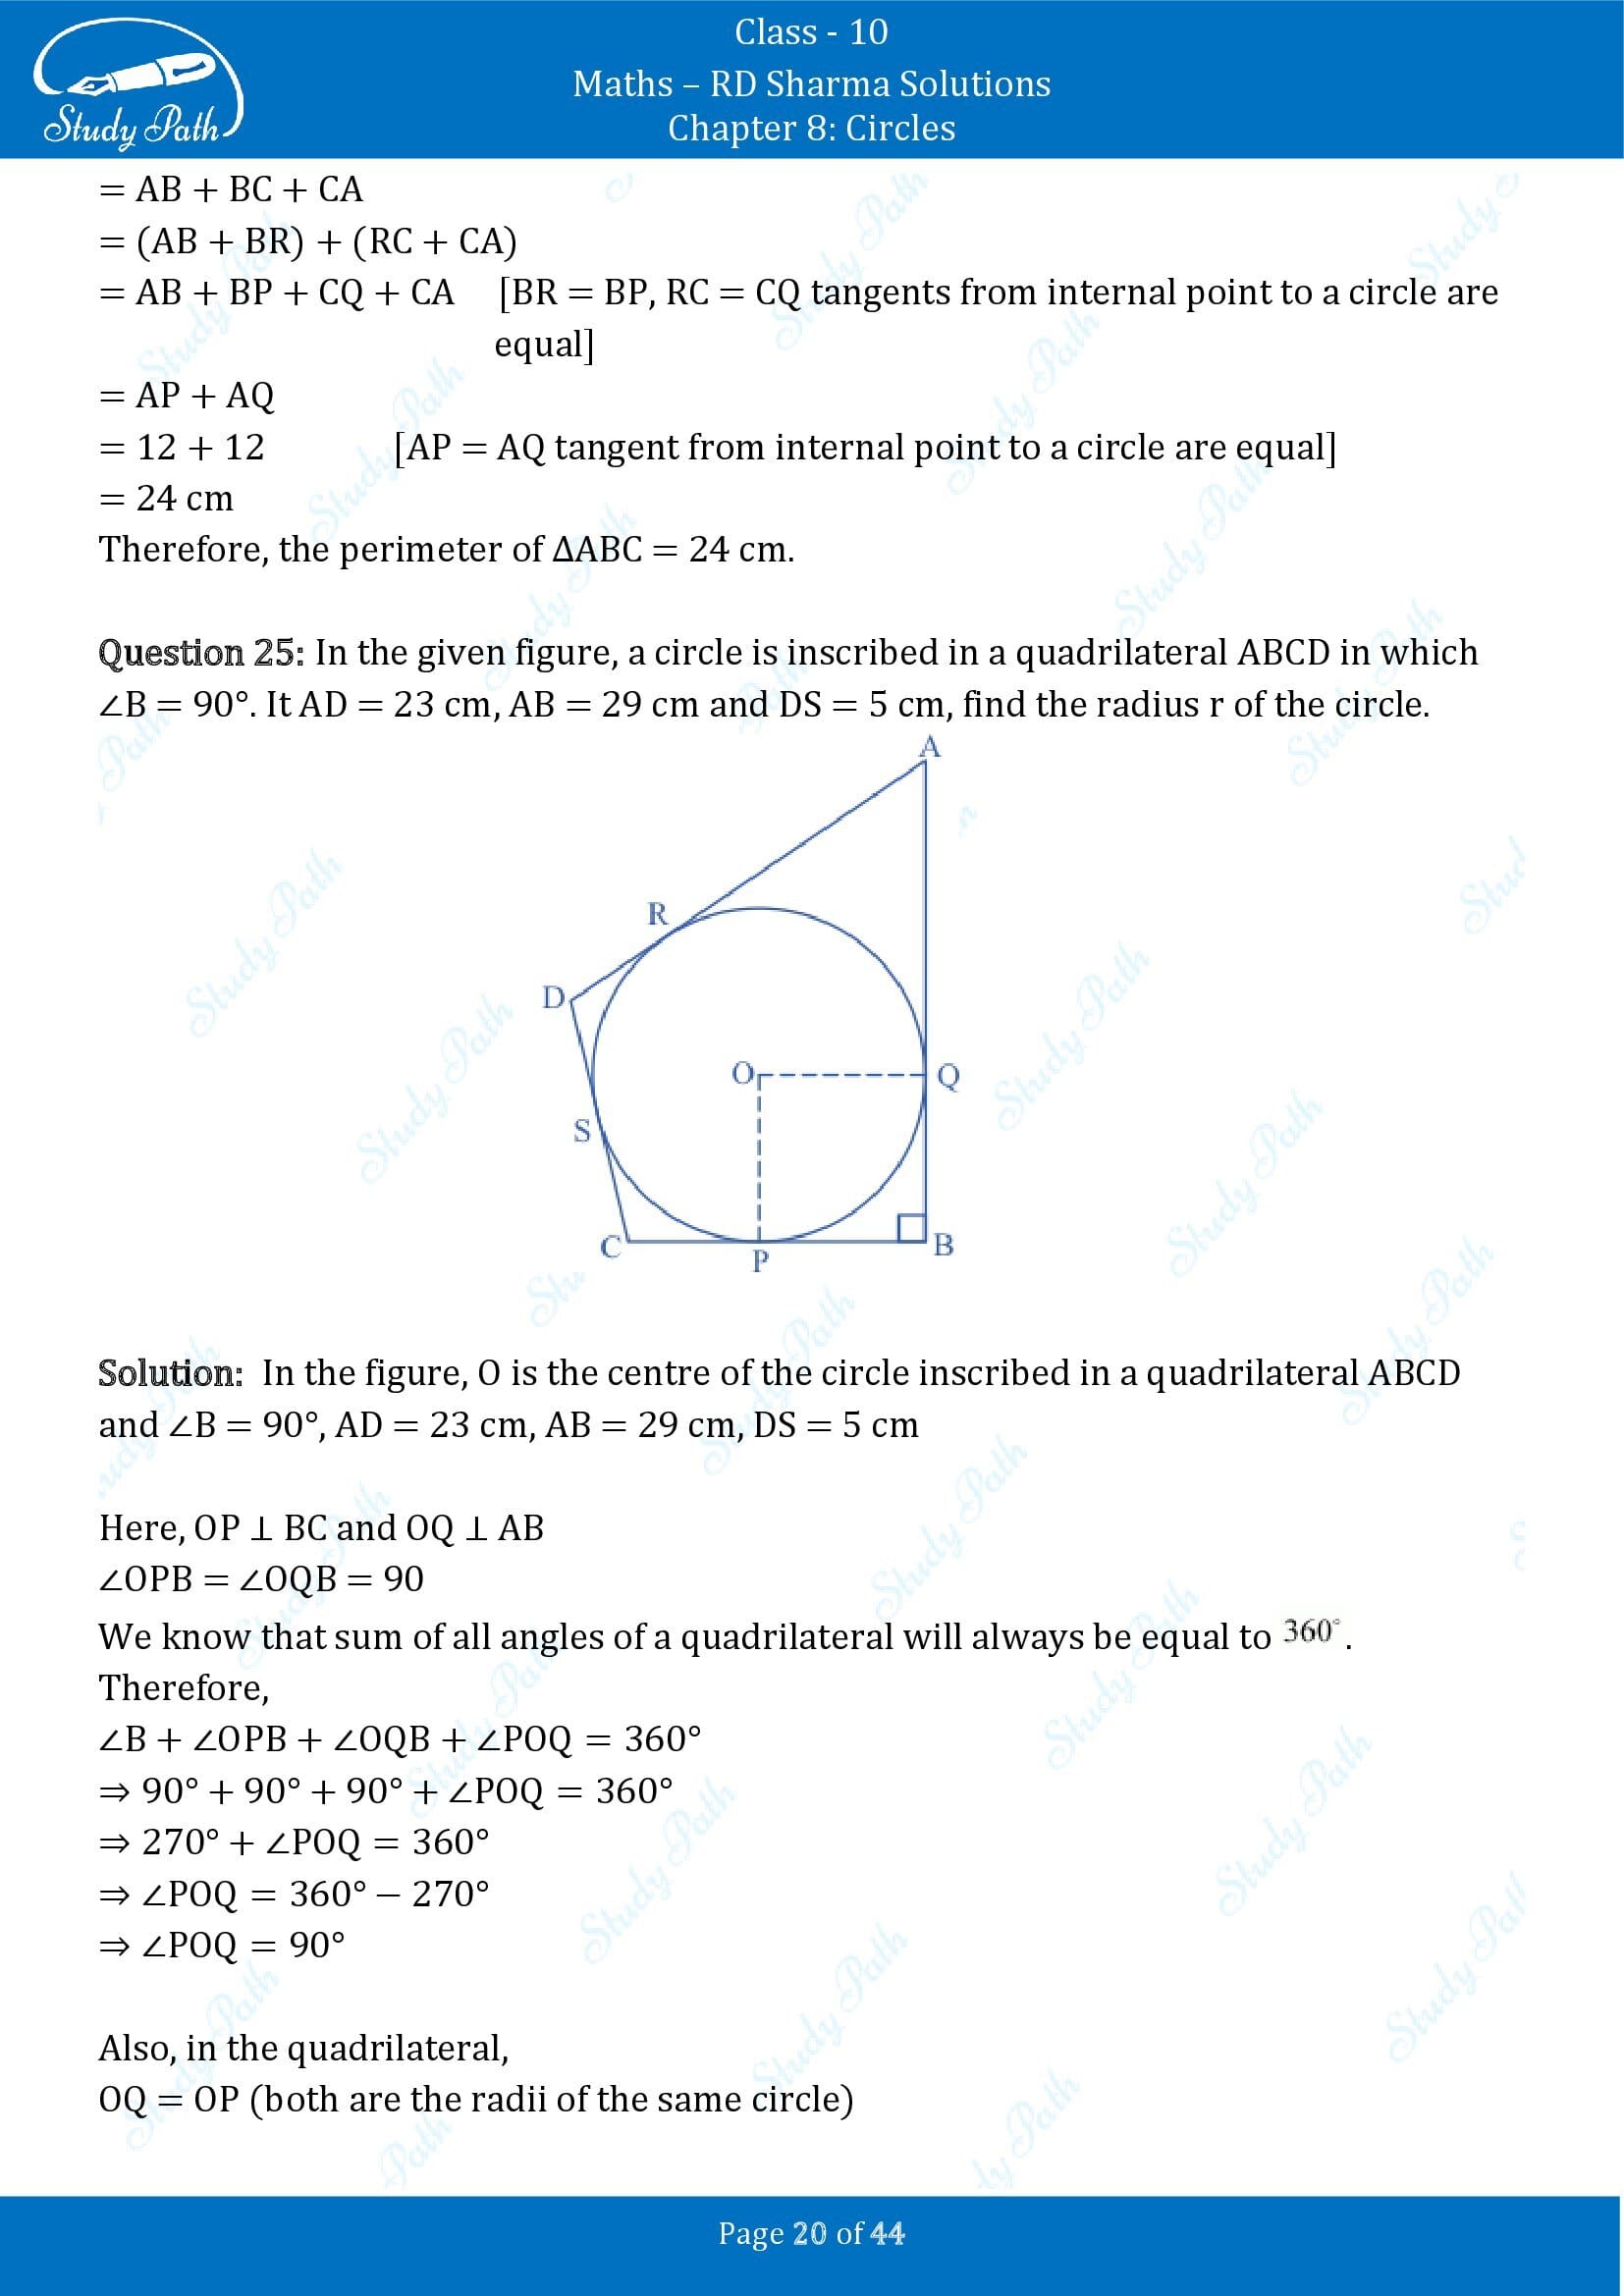 RD Sharma Solutions Class 10 Chapter 8 Circles Exercise 8.2 00020